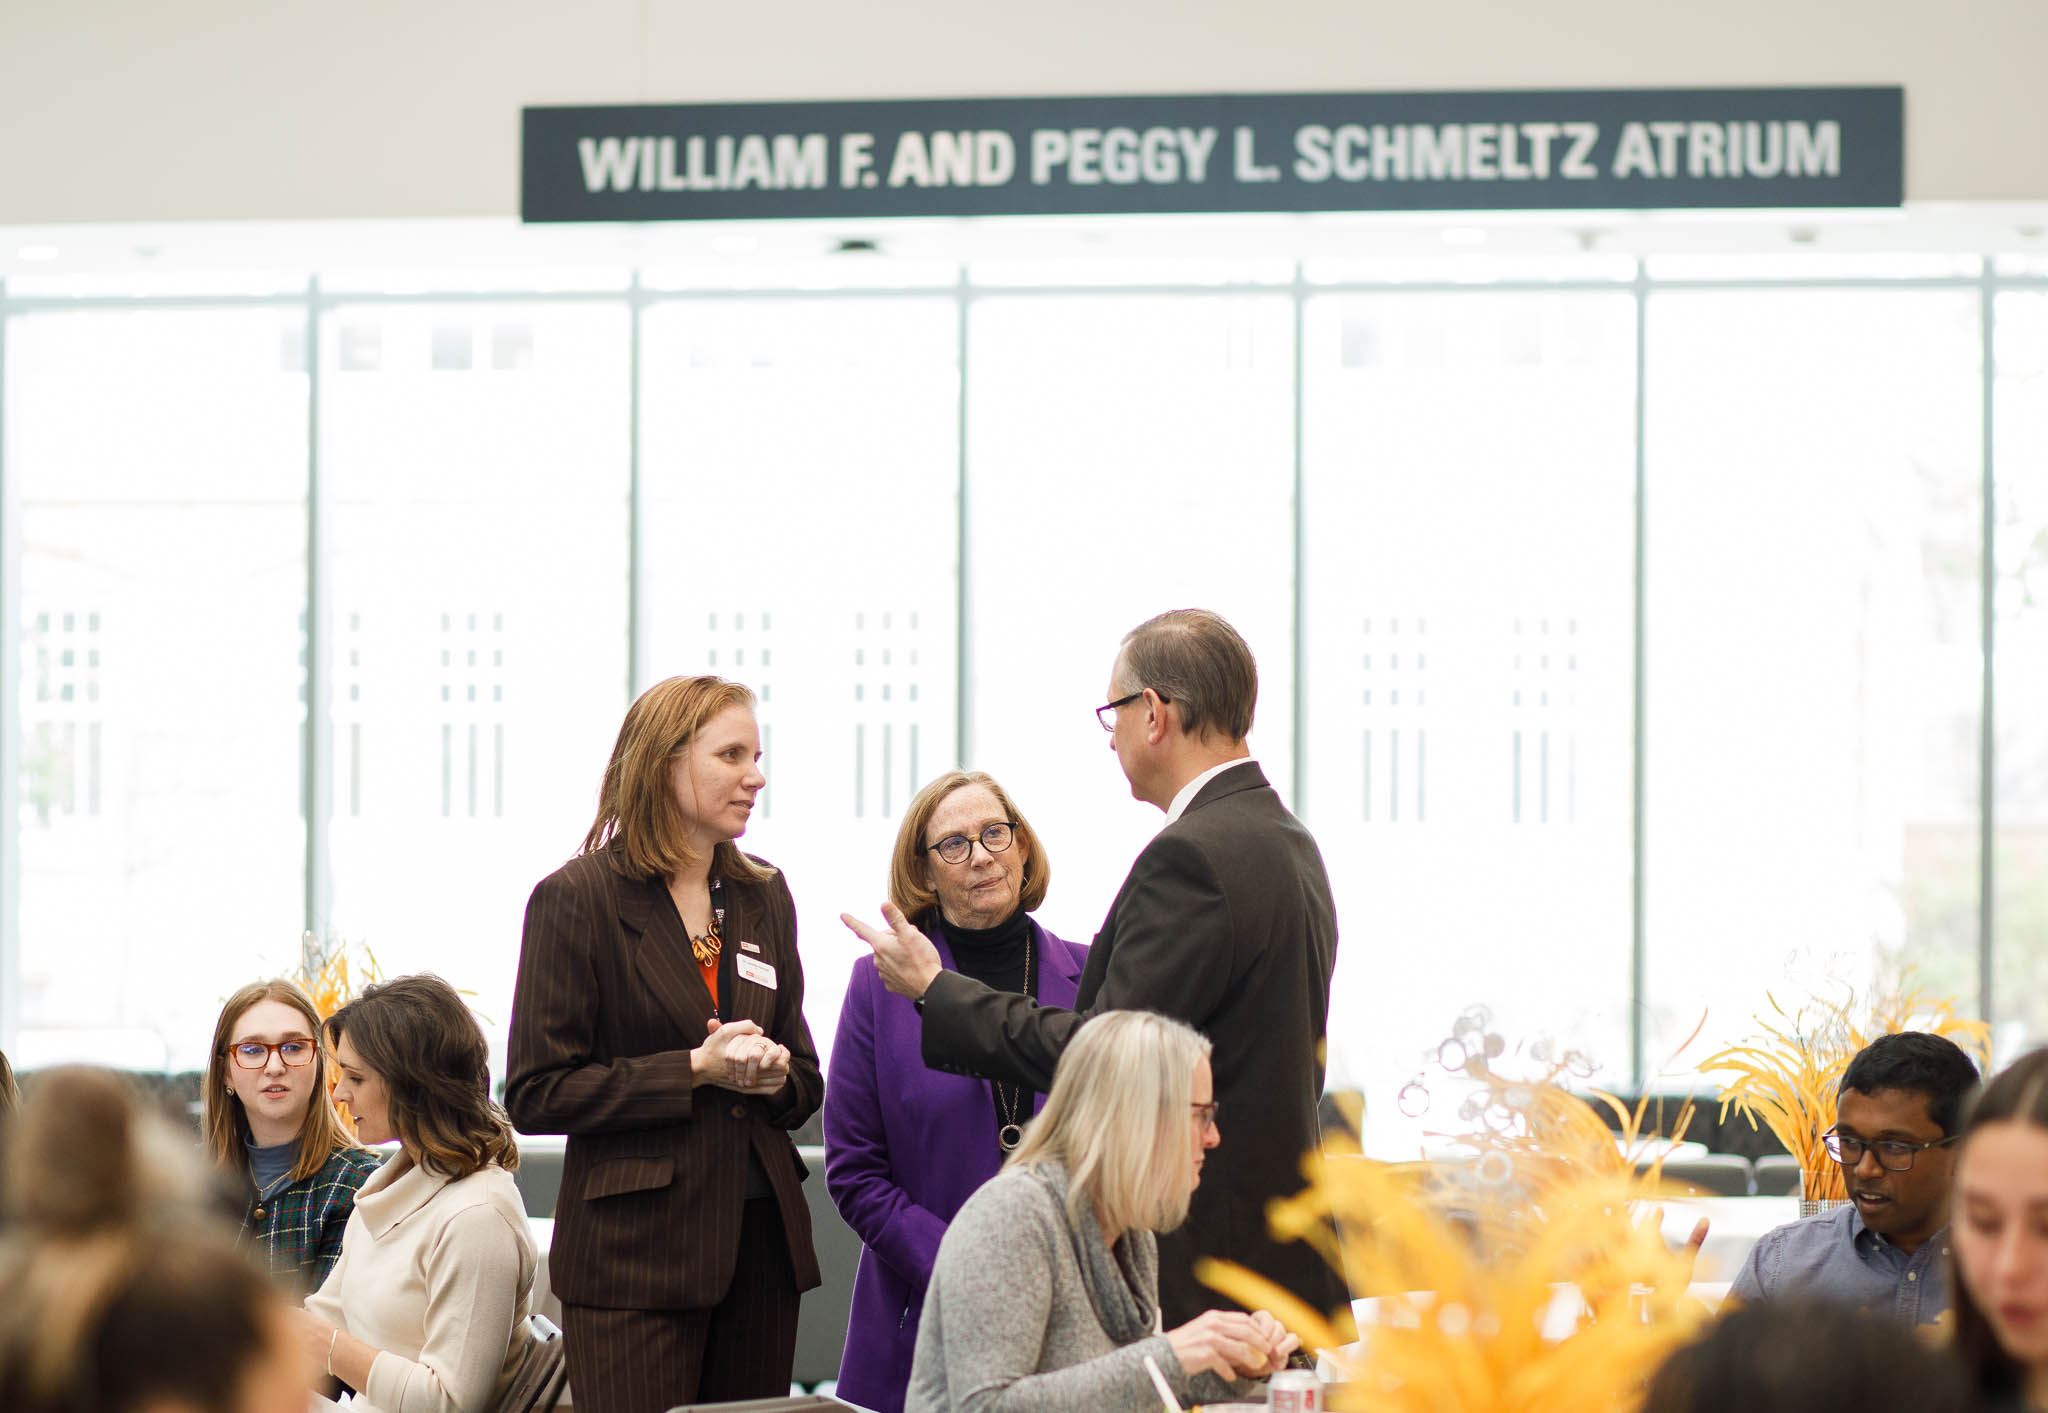 Photo of Dean Jennifer Percival with Tom Daniels and Barbara Stahl in the Schmeltz Atrium of the Maurer Center on BGSU Campus